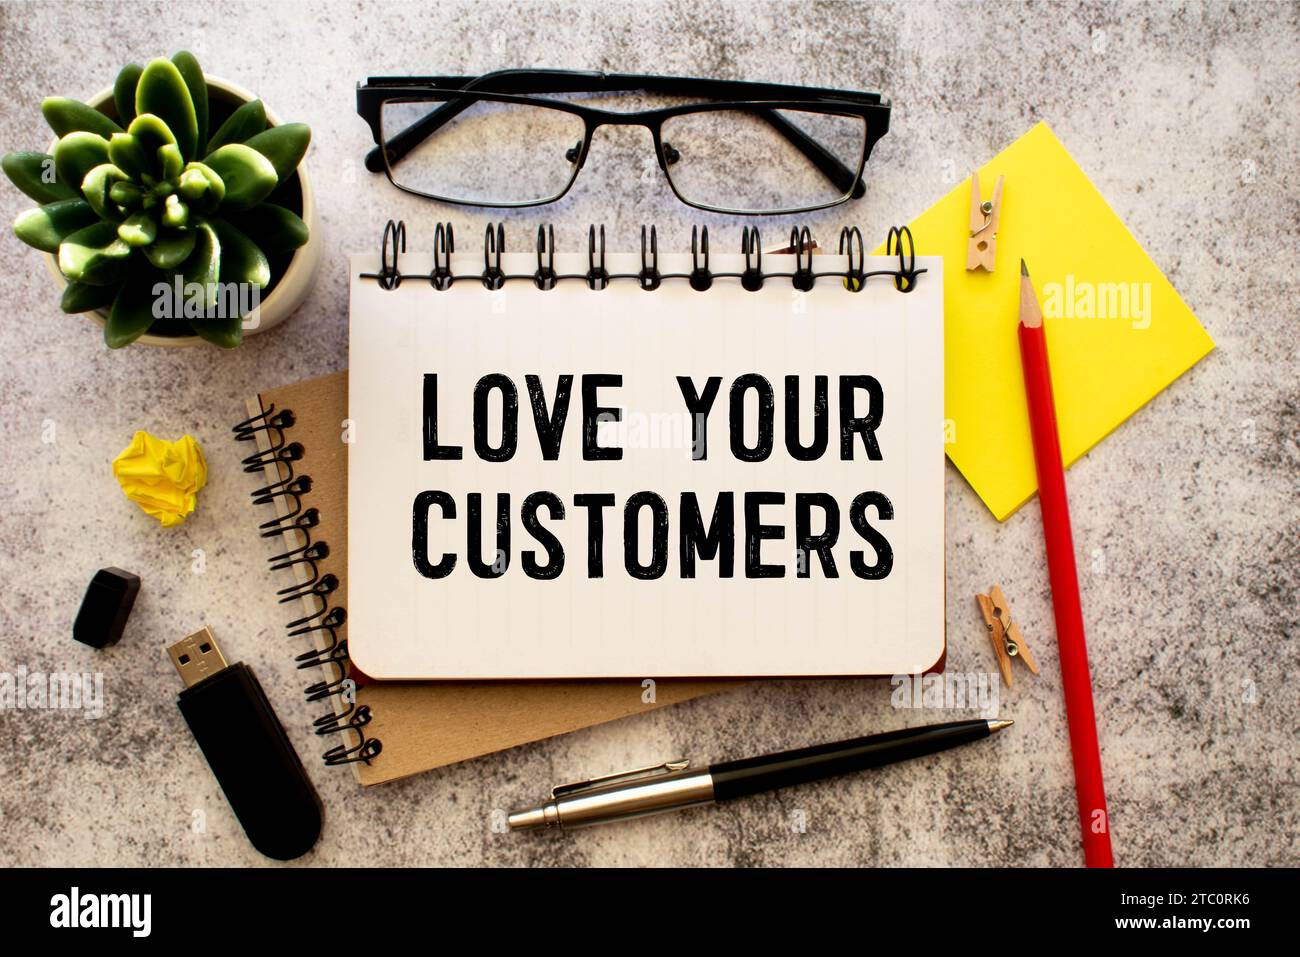 text LOVE YOUR CUSTOMERS on white paper. Stock Photo